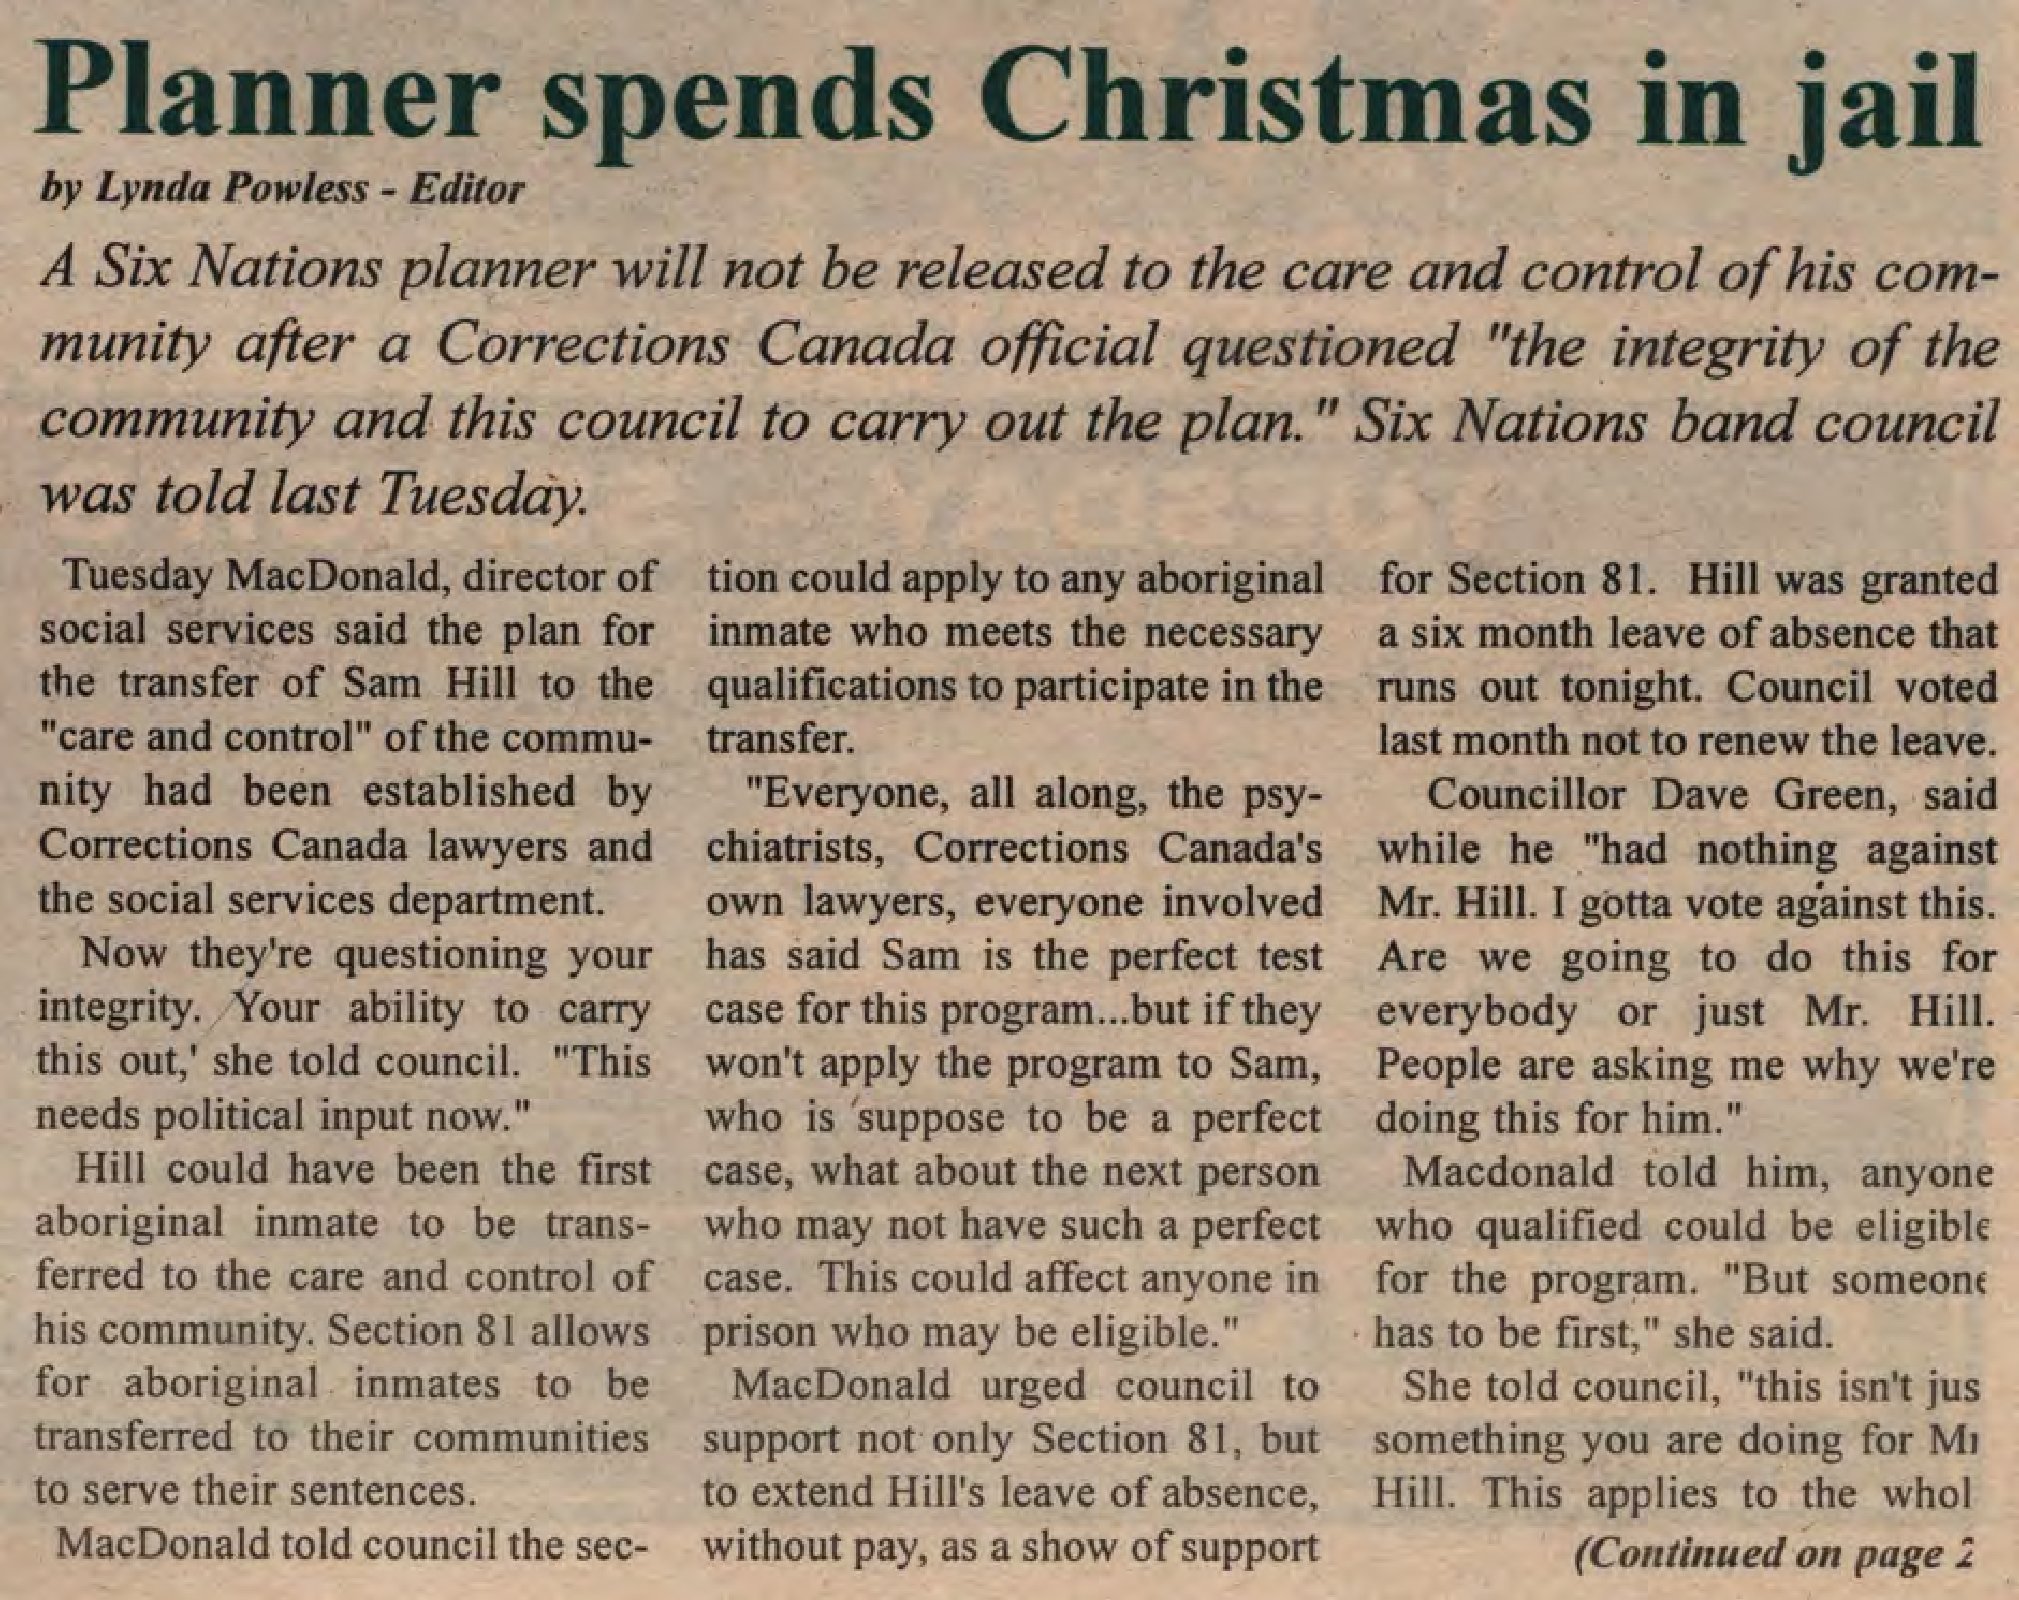 Planner spends Christmas in jail/